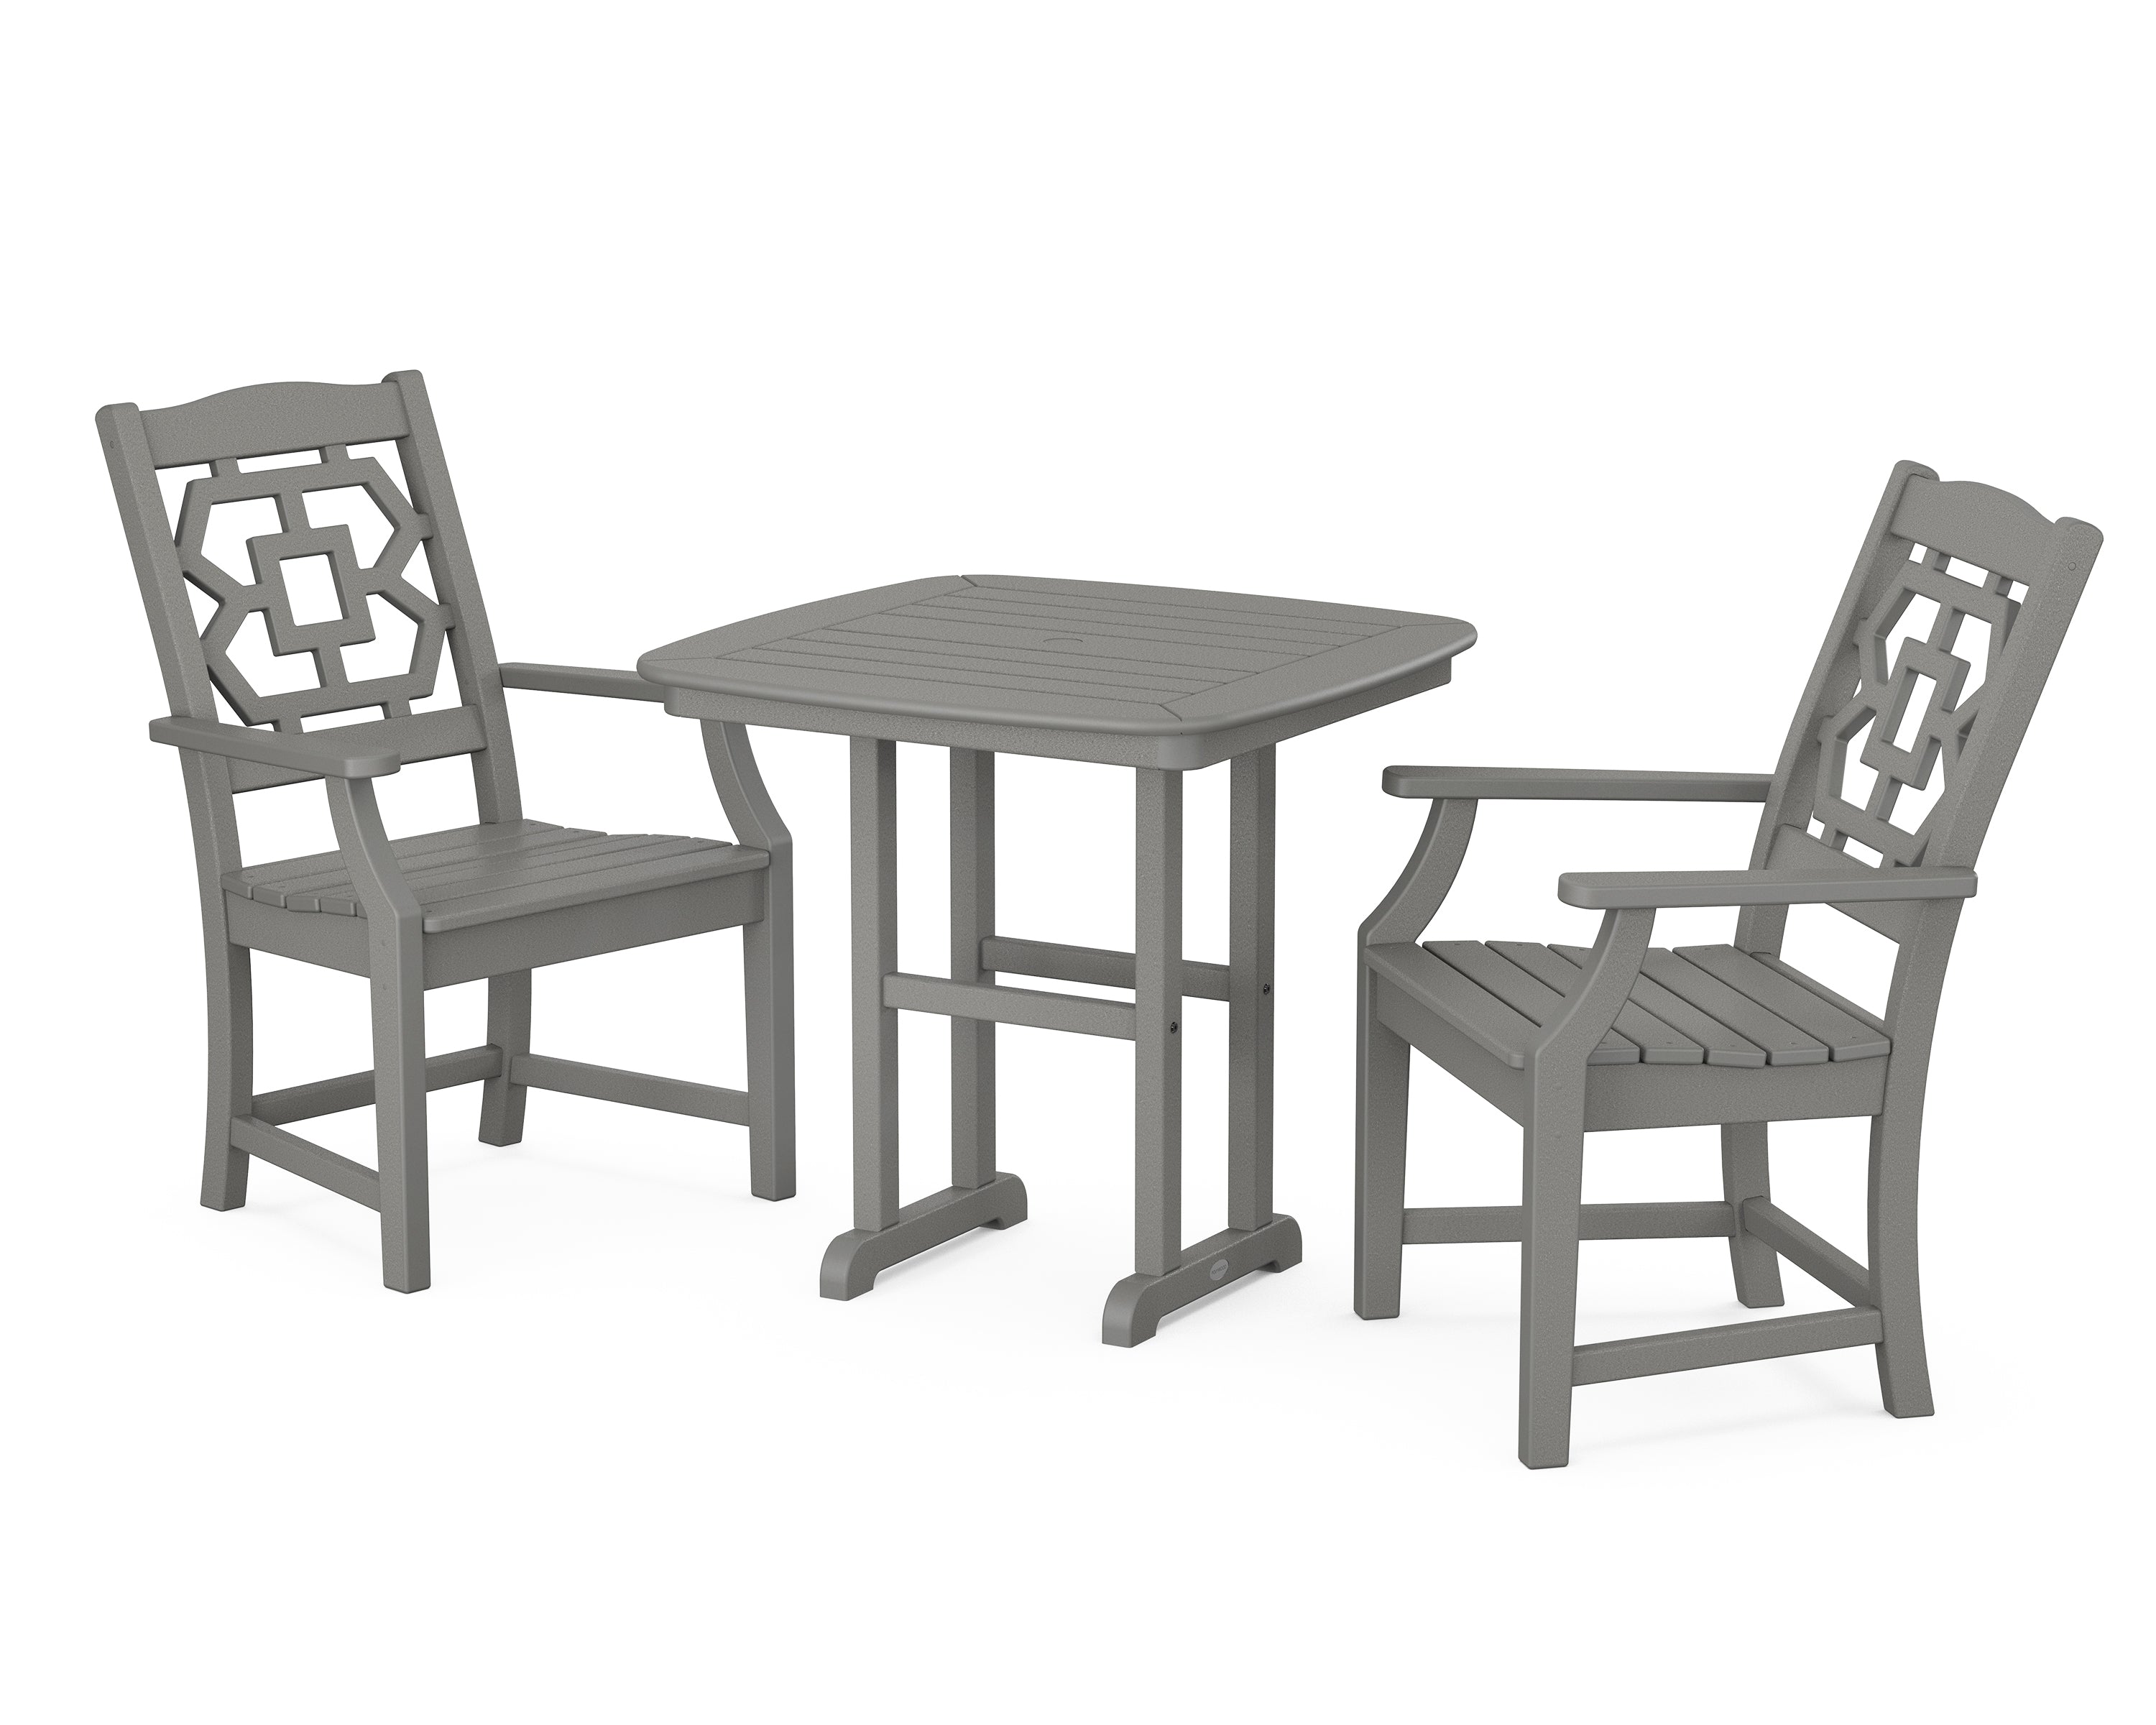 Martha Stewart by POLYWOOD® Chinoiserie 3-Piece Dining Set in Slate Grey